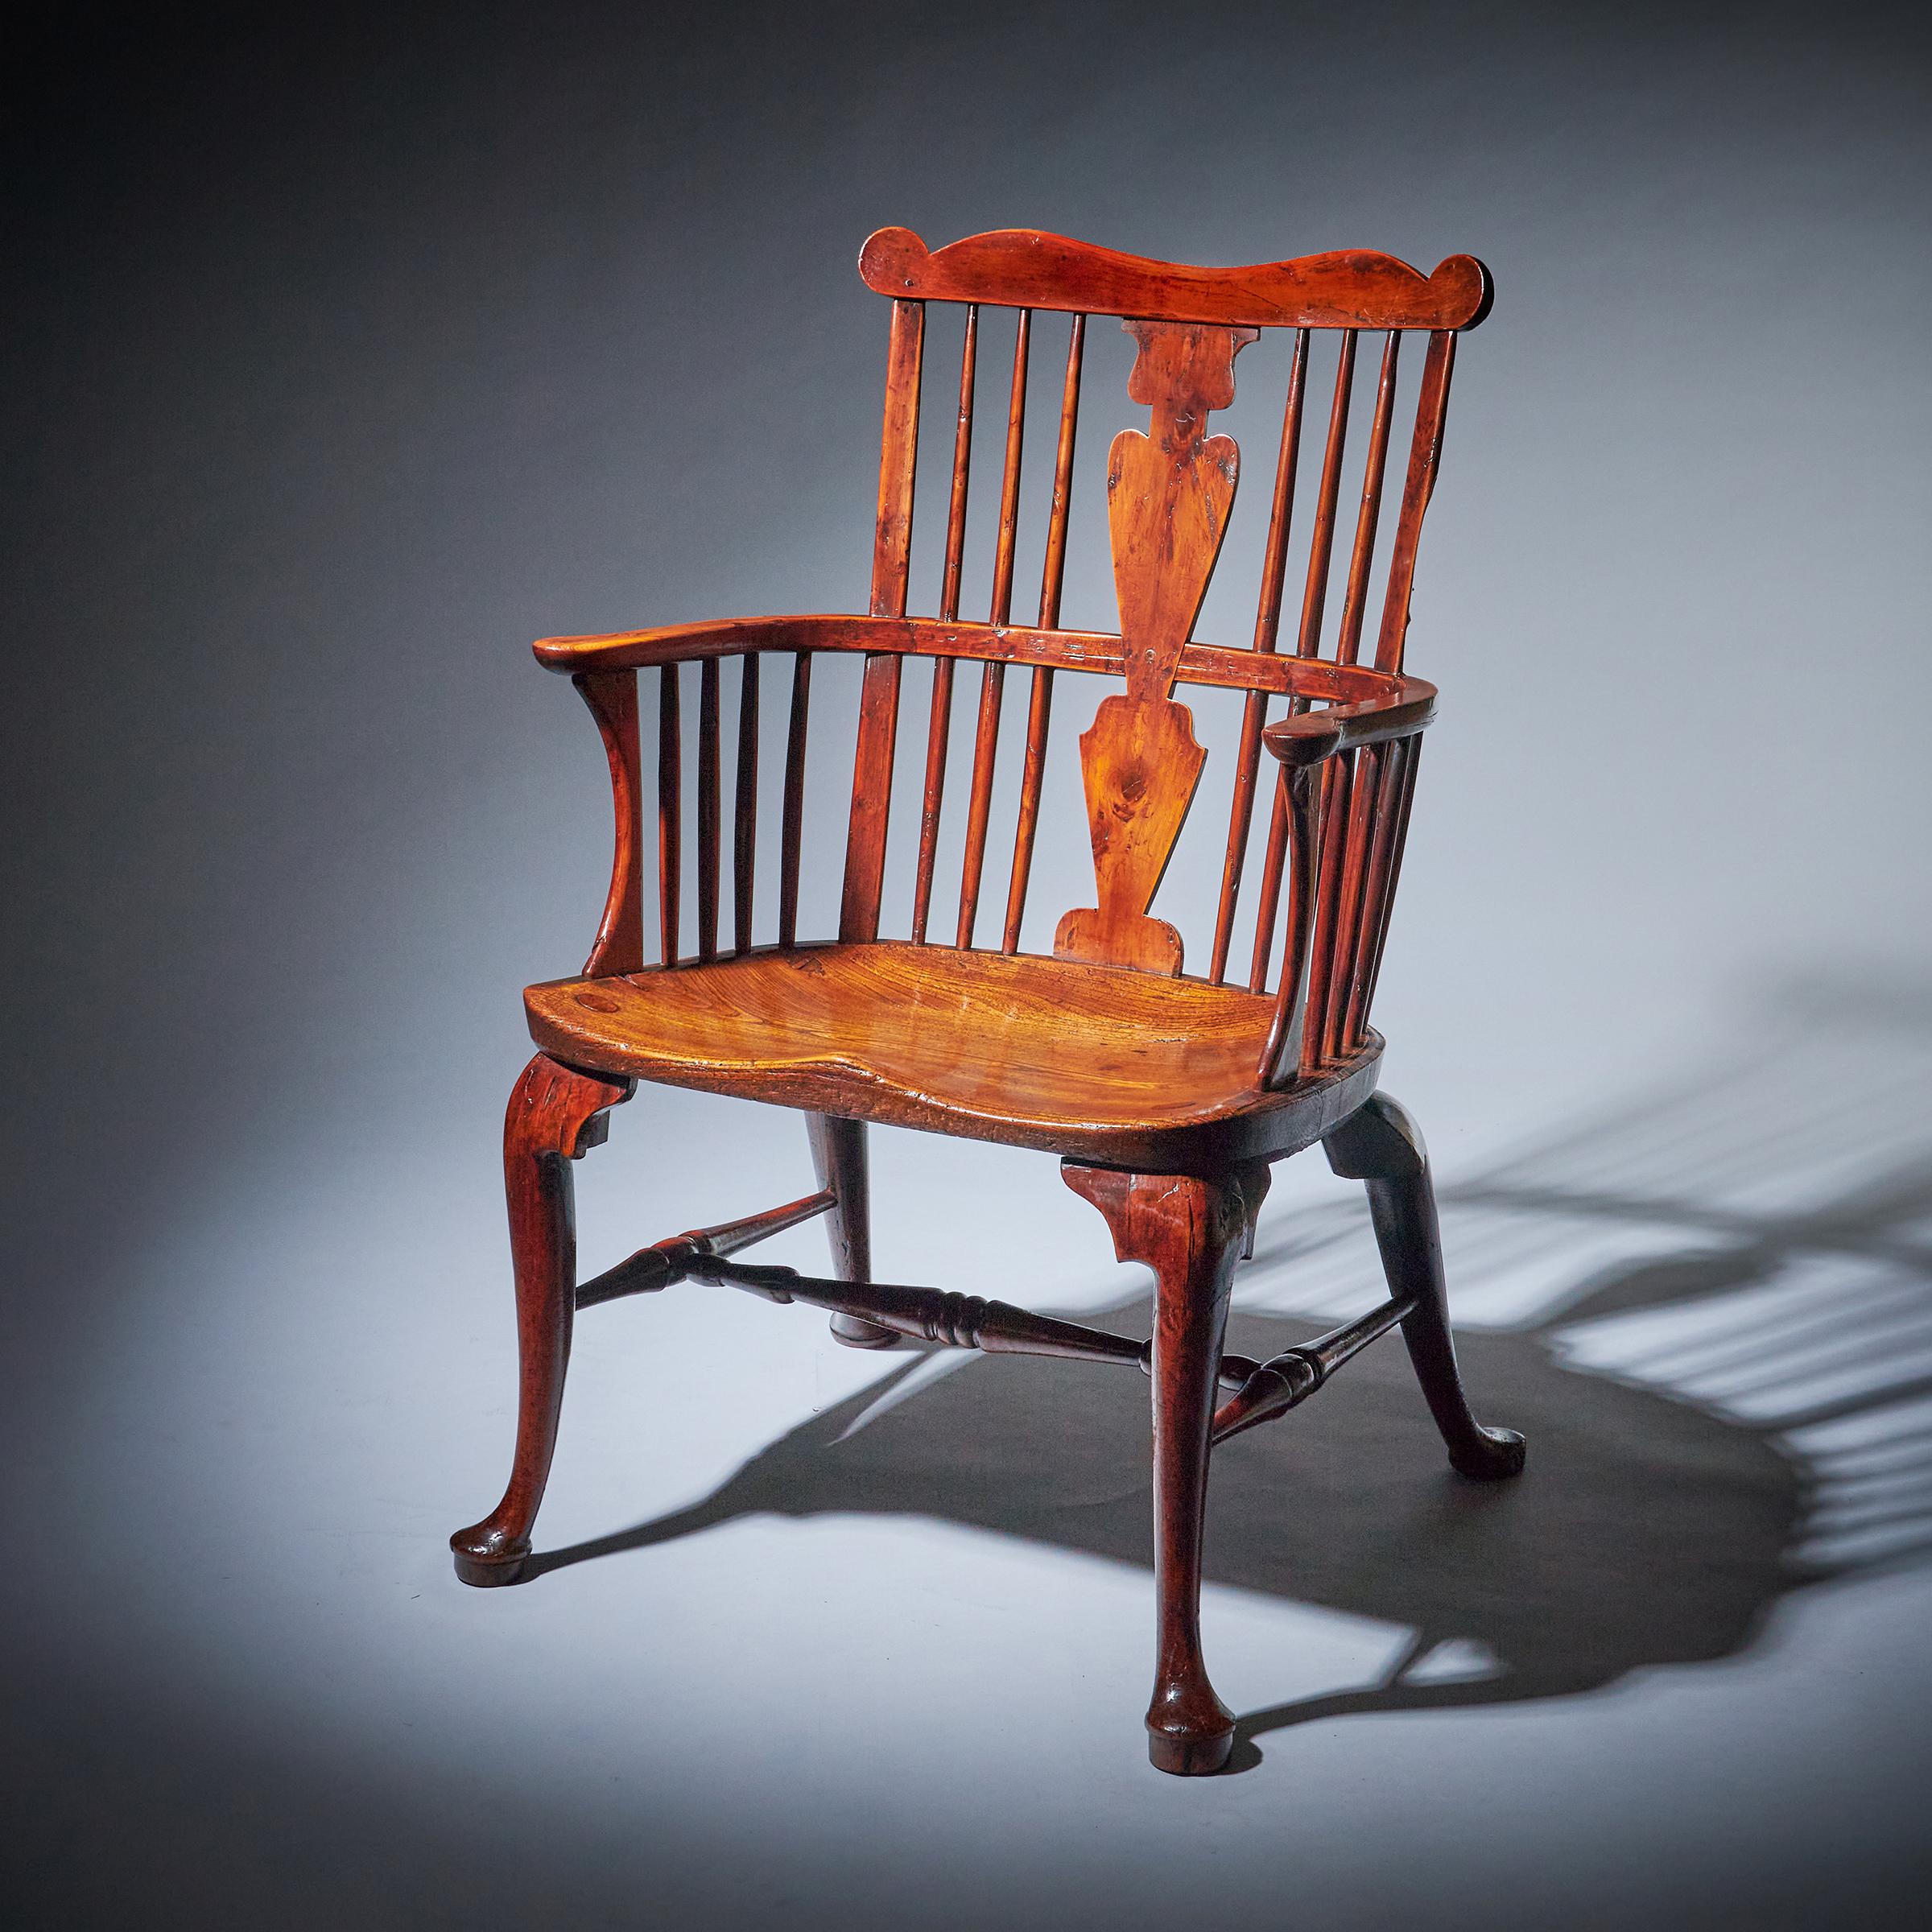 The exceptional and rare yew and elm comb-back Regional Windsor chair of large scale from the Thames Valley region, circa 1760. England
Attributed to John Pitt and Richard Hewitt.

The chair is incredibly comfortable and of generous proportions